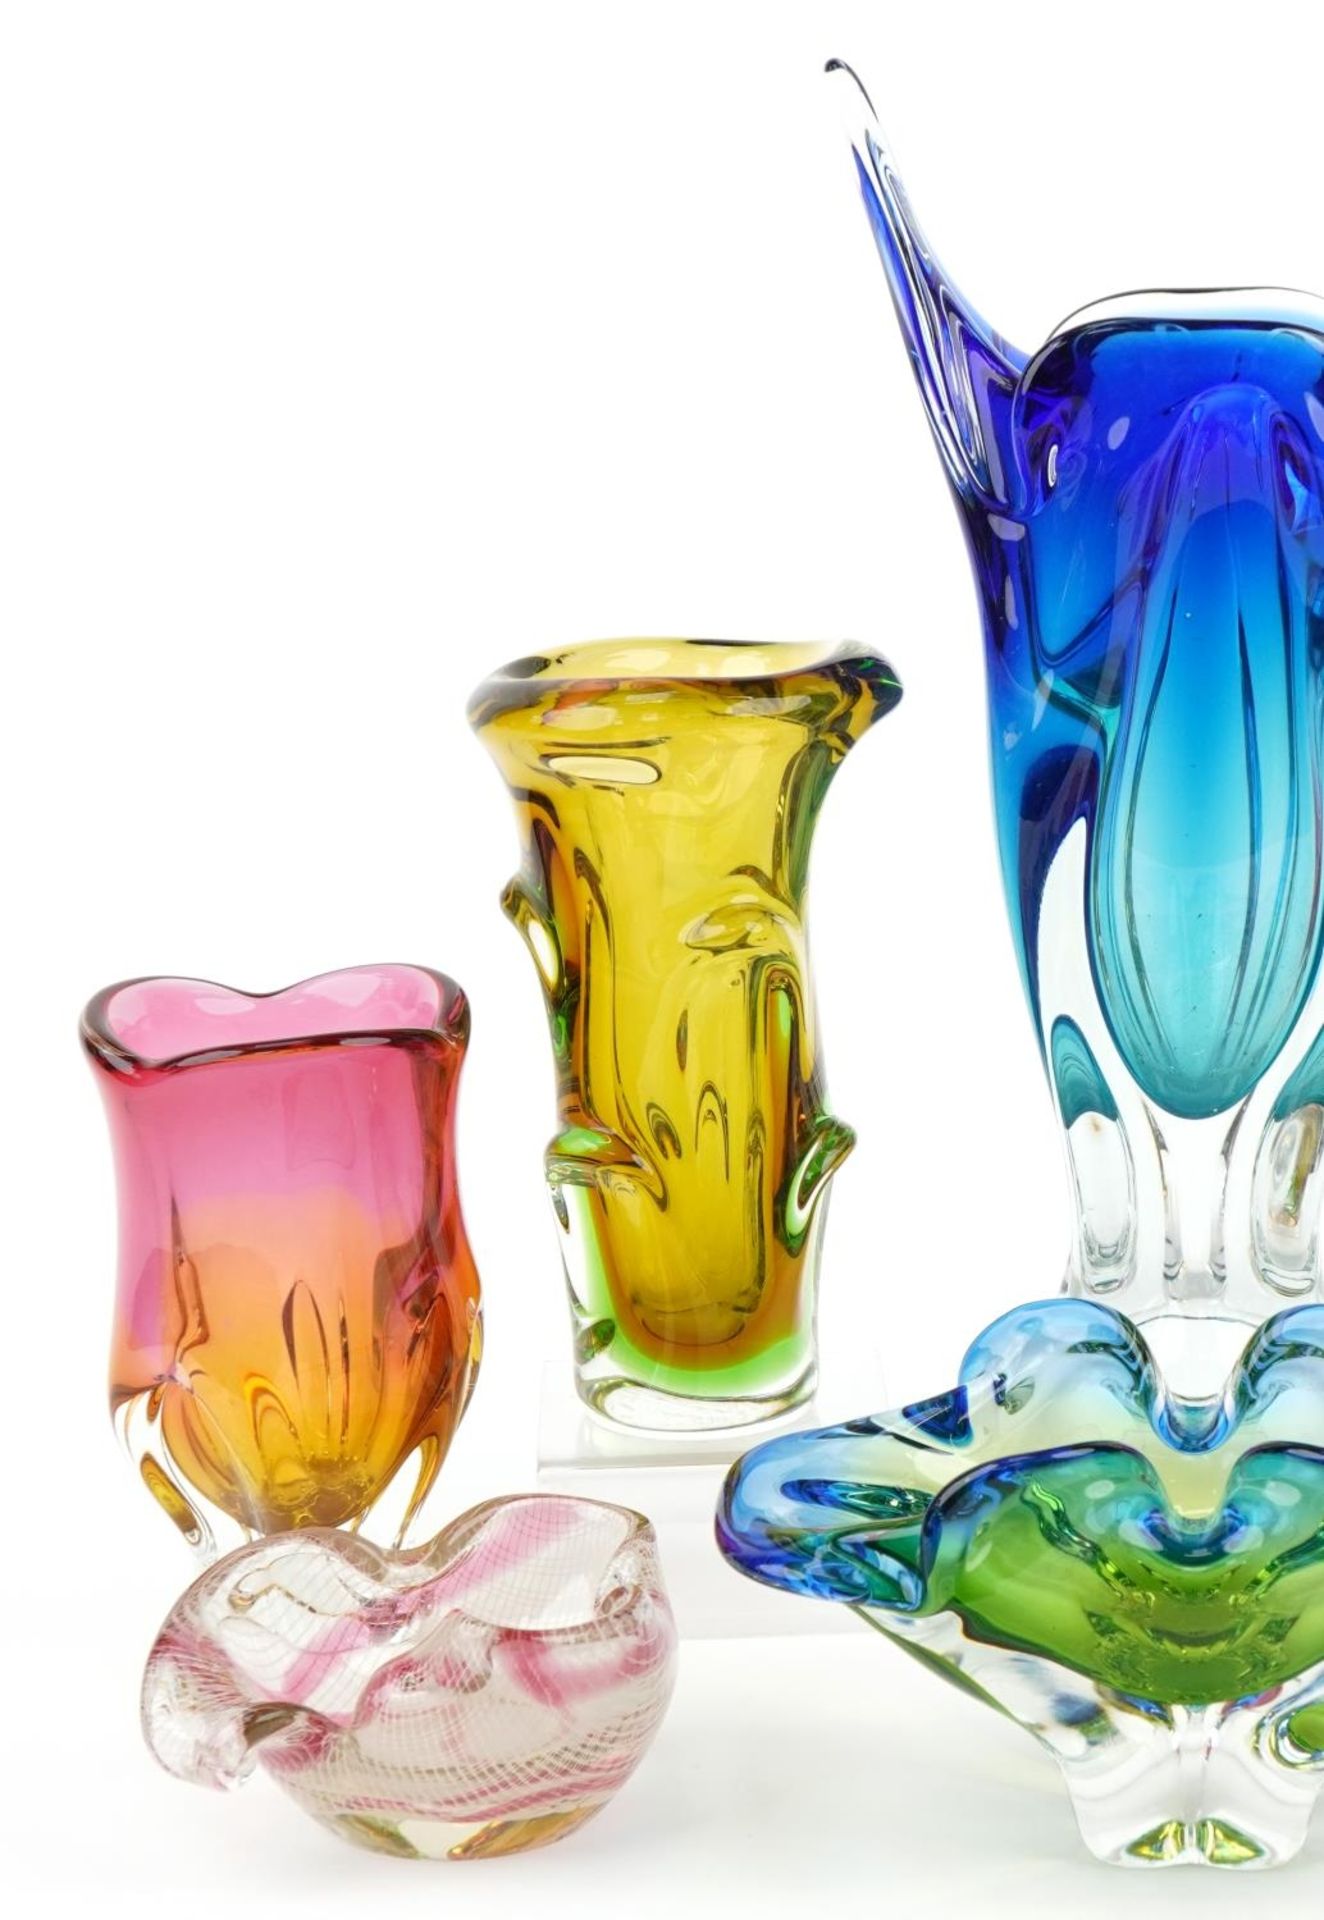 Czechoslovakian art glassware including Seguso style two colour glass vases, the largest 38cm high - Image 3 of 6